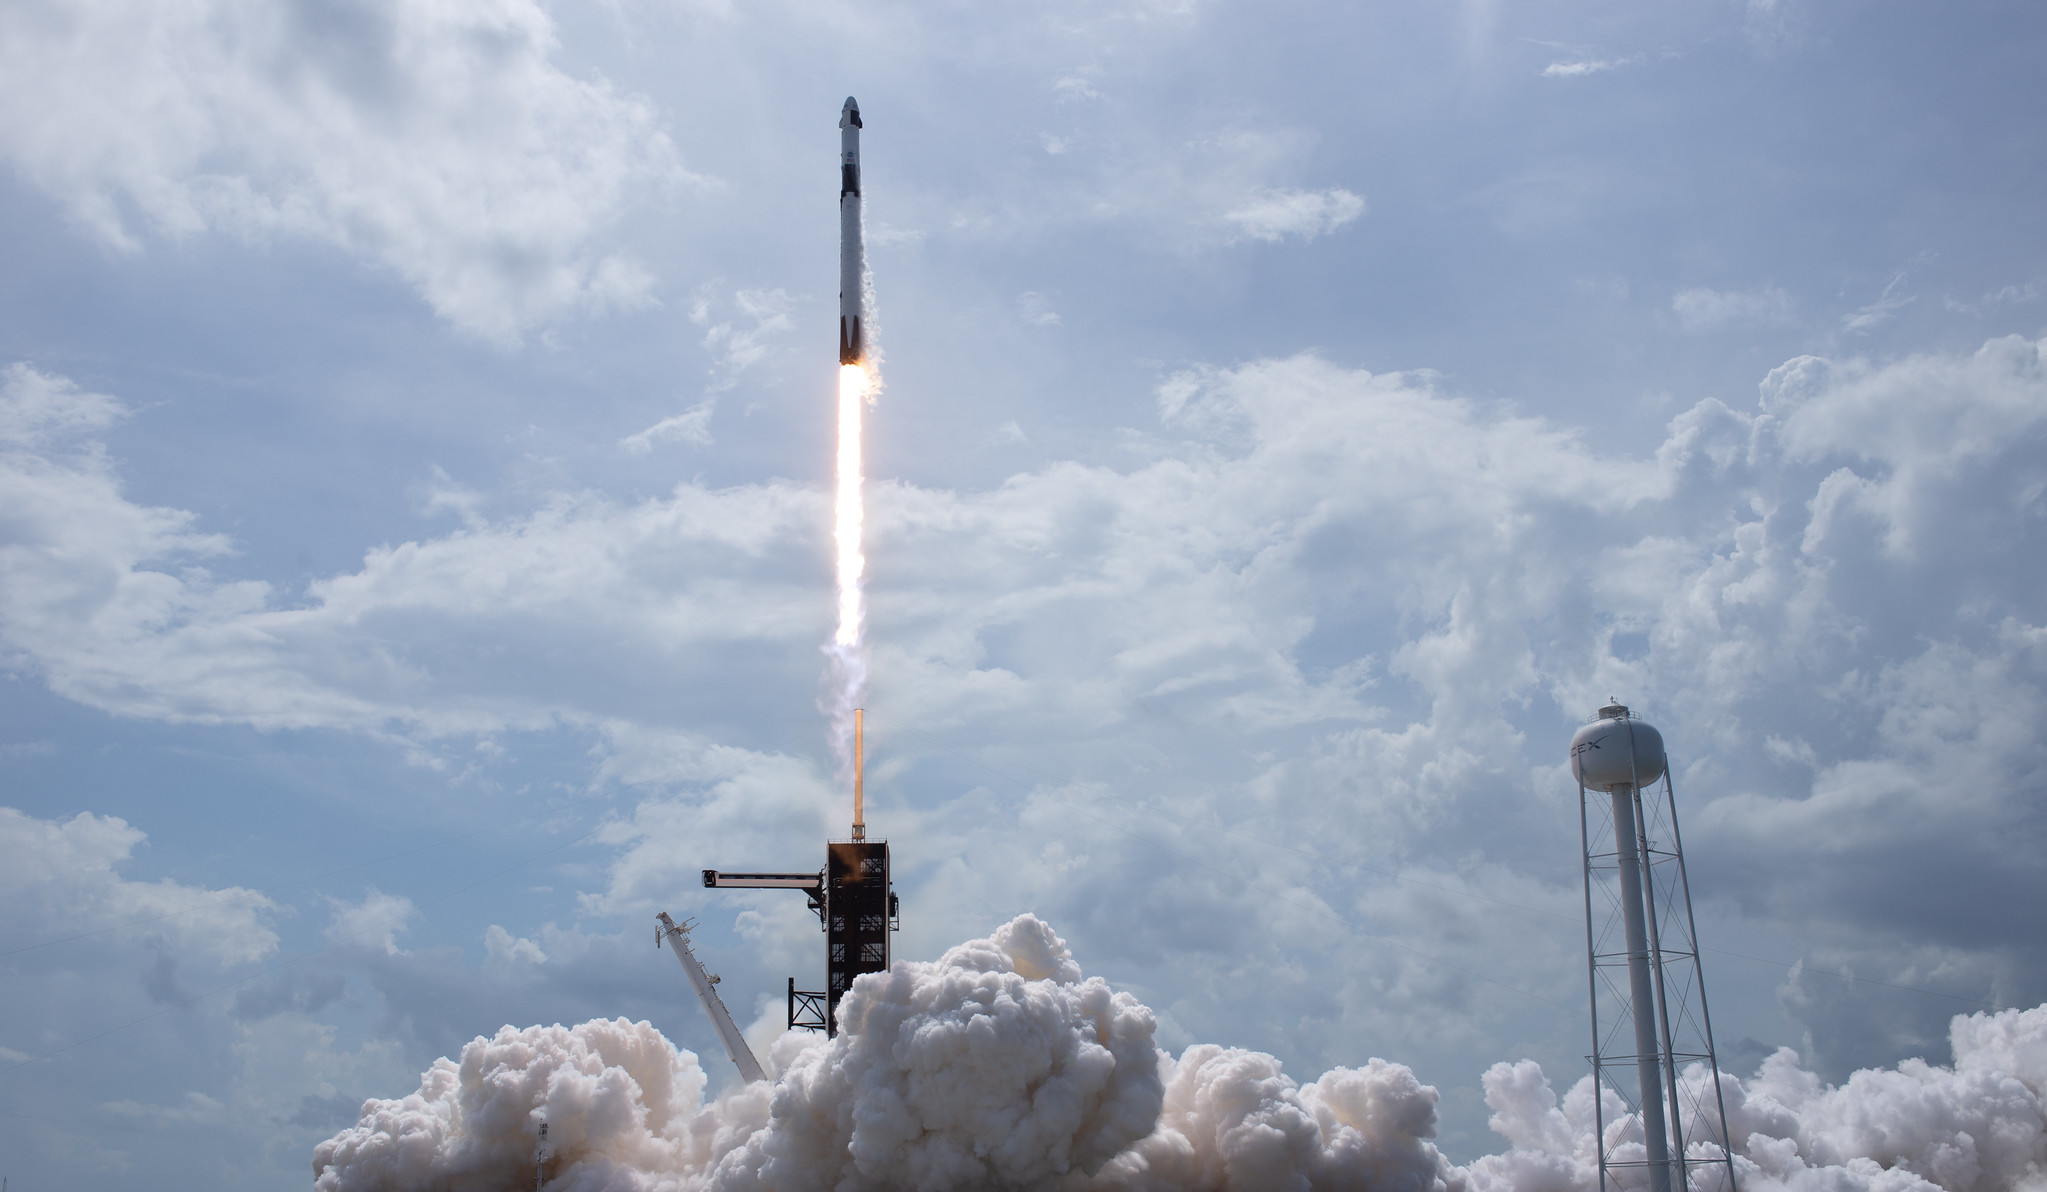 A SpaceX Falcon 9 rocket carrying the company's Crew Dragon spacecraft is launched from Launch Complex 39A